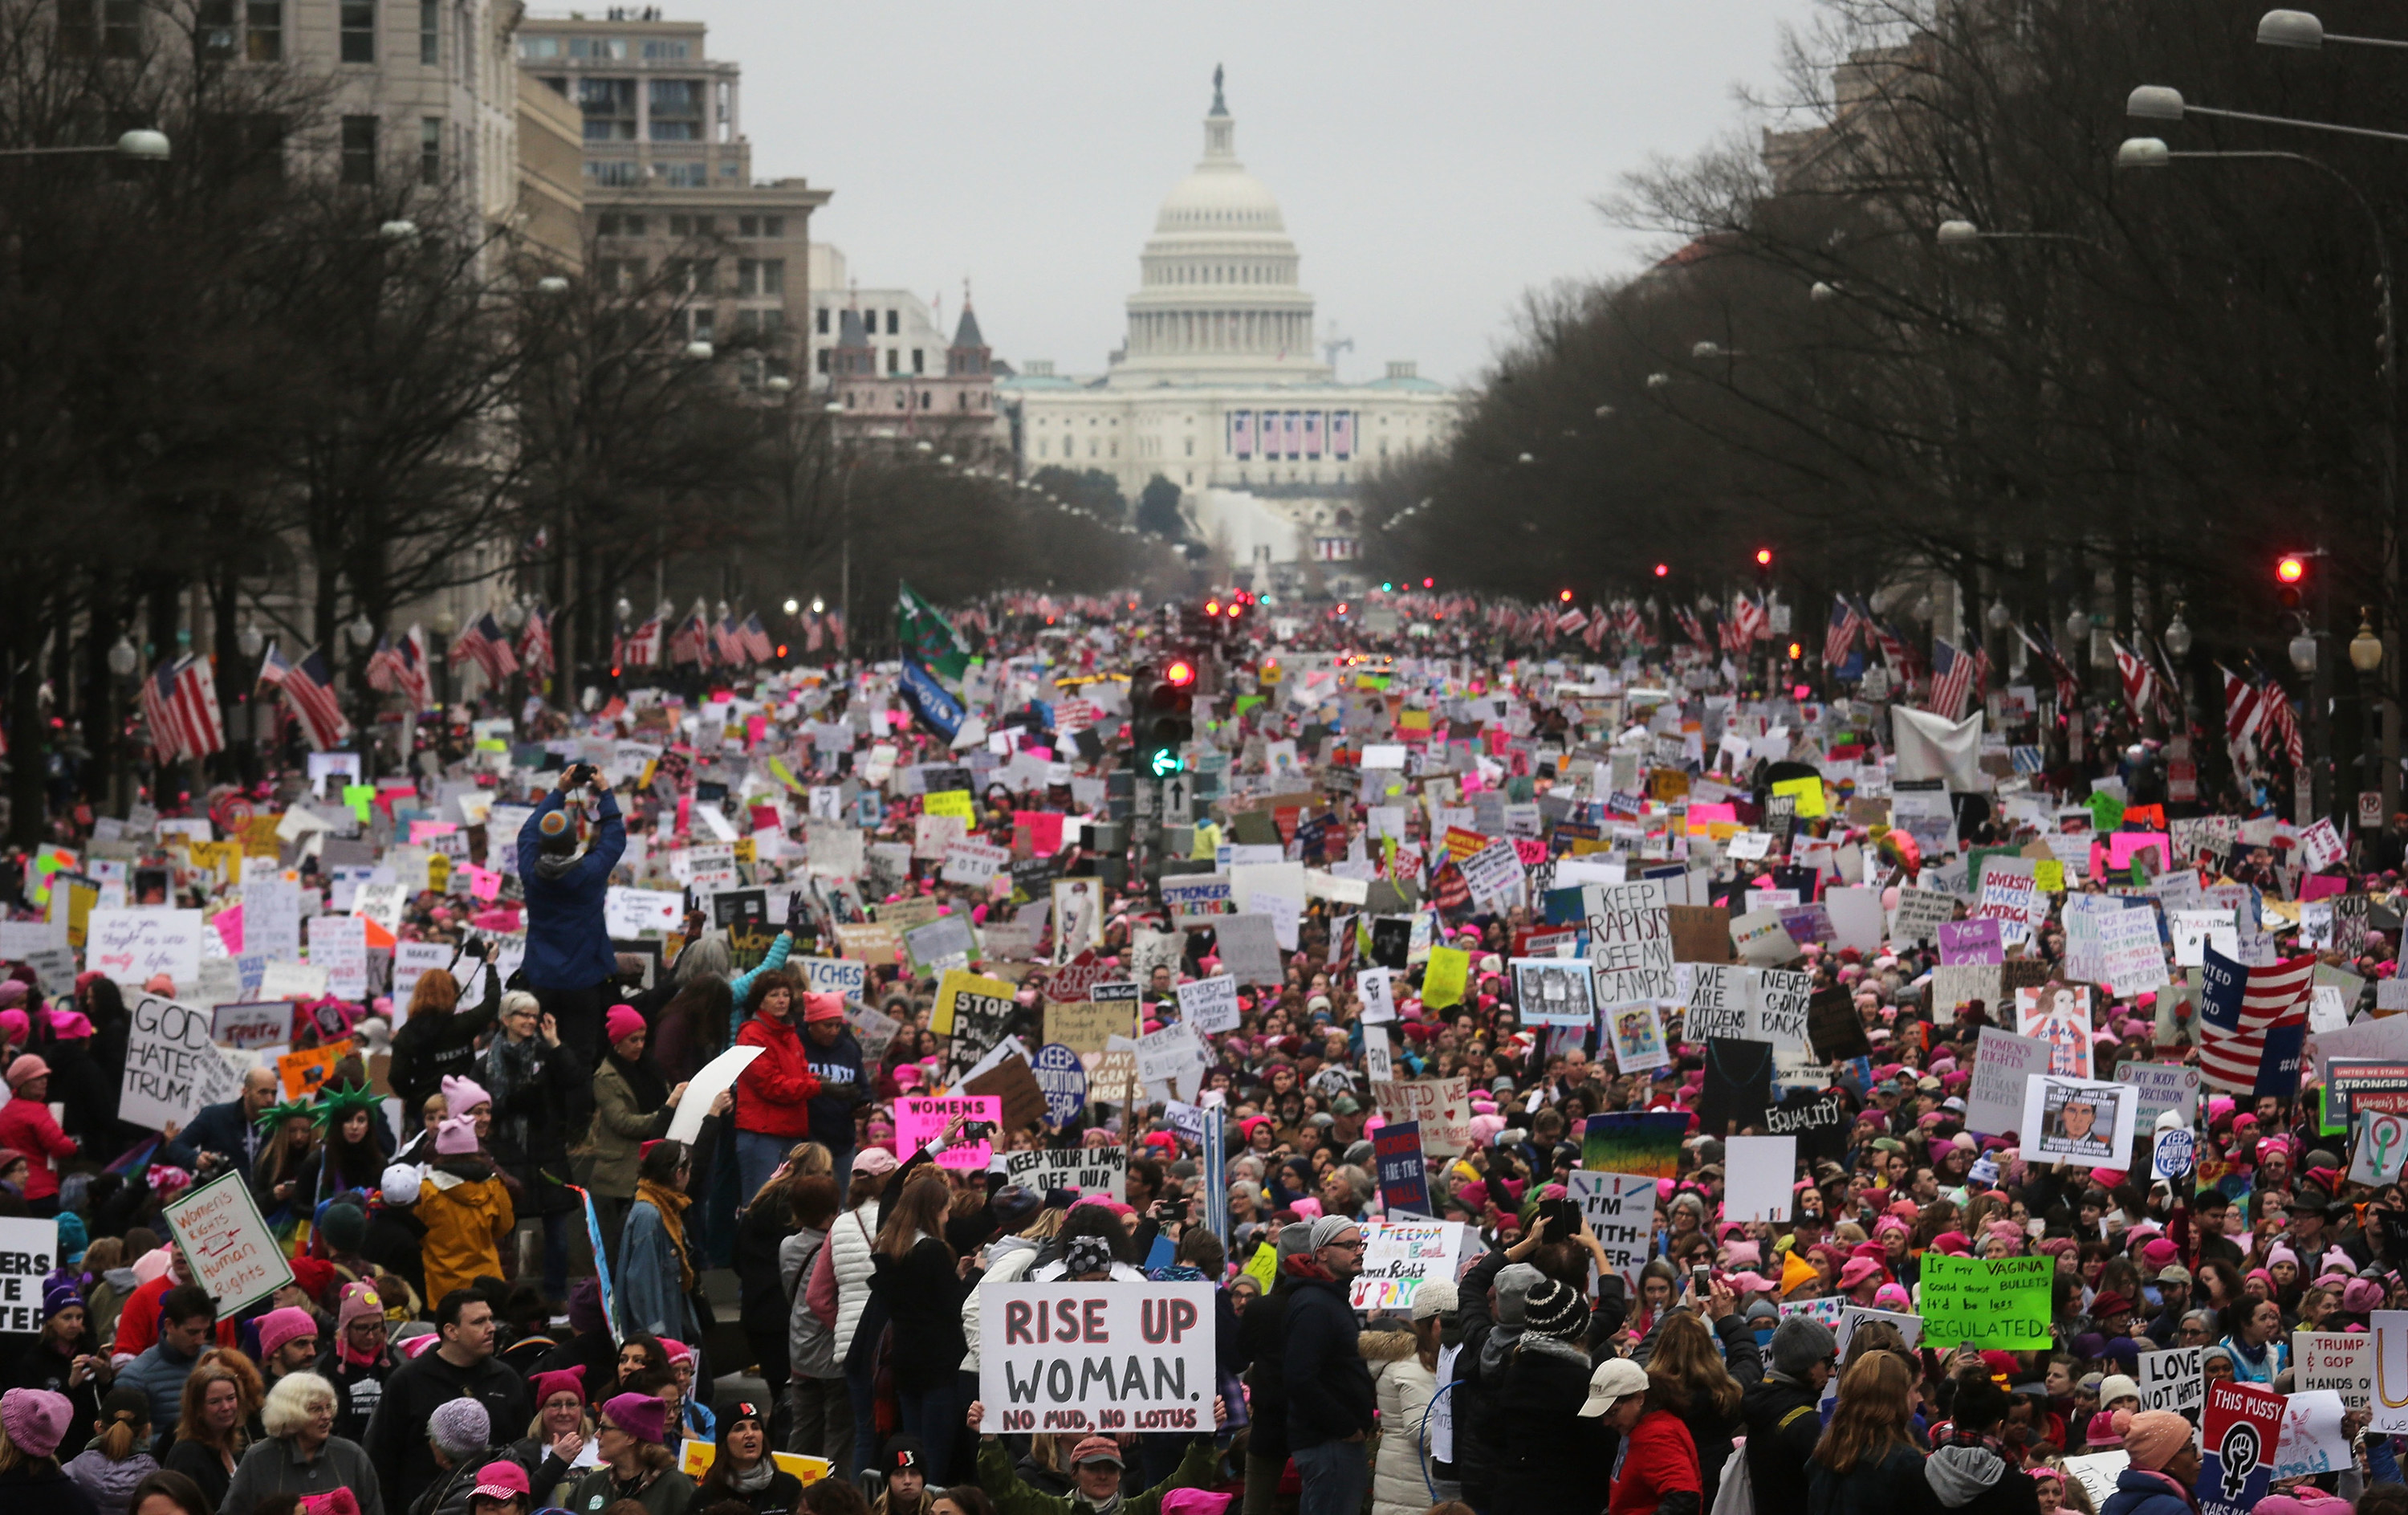 Protesters walk during the Women&#x27;s March on Washington, with the U.S. Capitol in the background, on January 21, 2017 in Washington, DC.